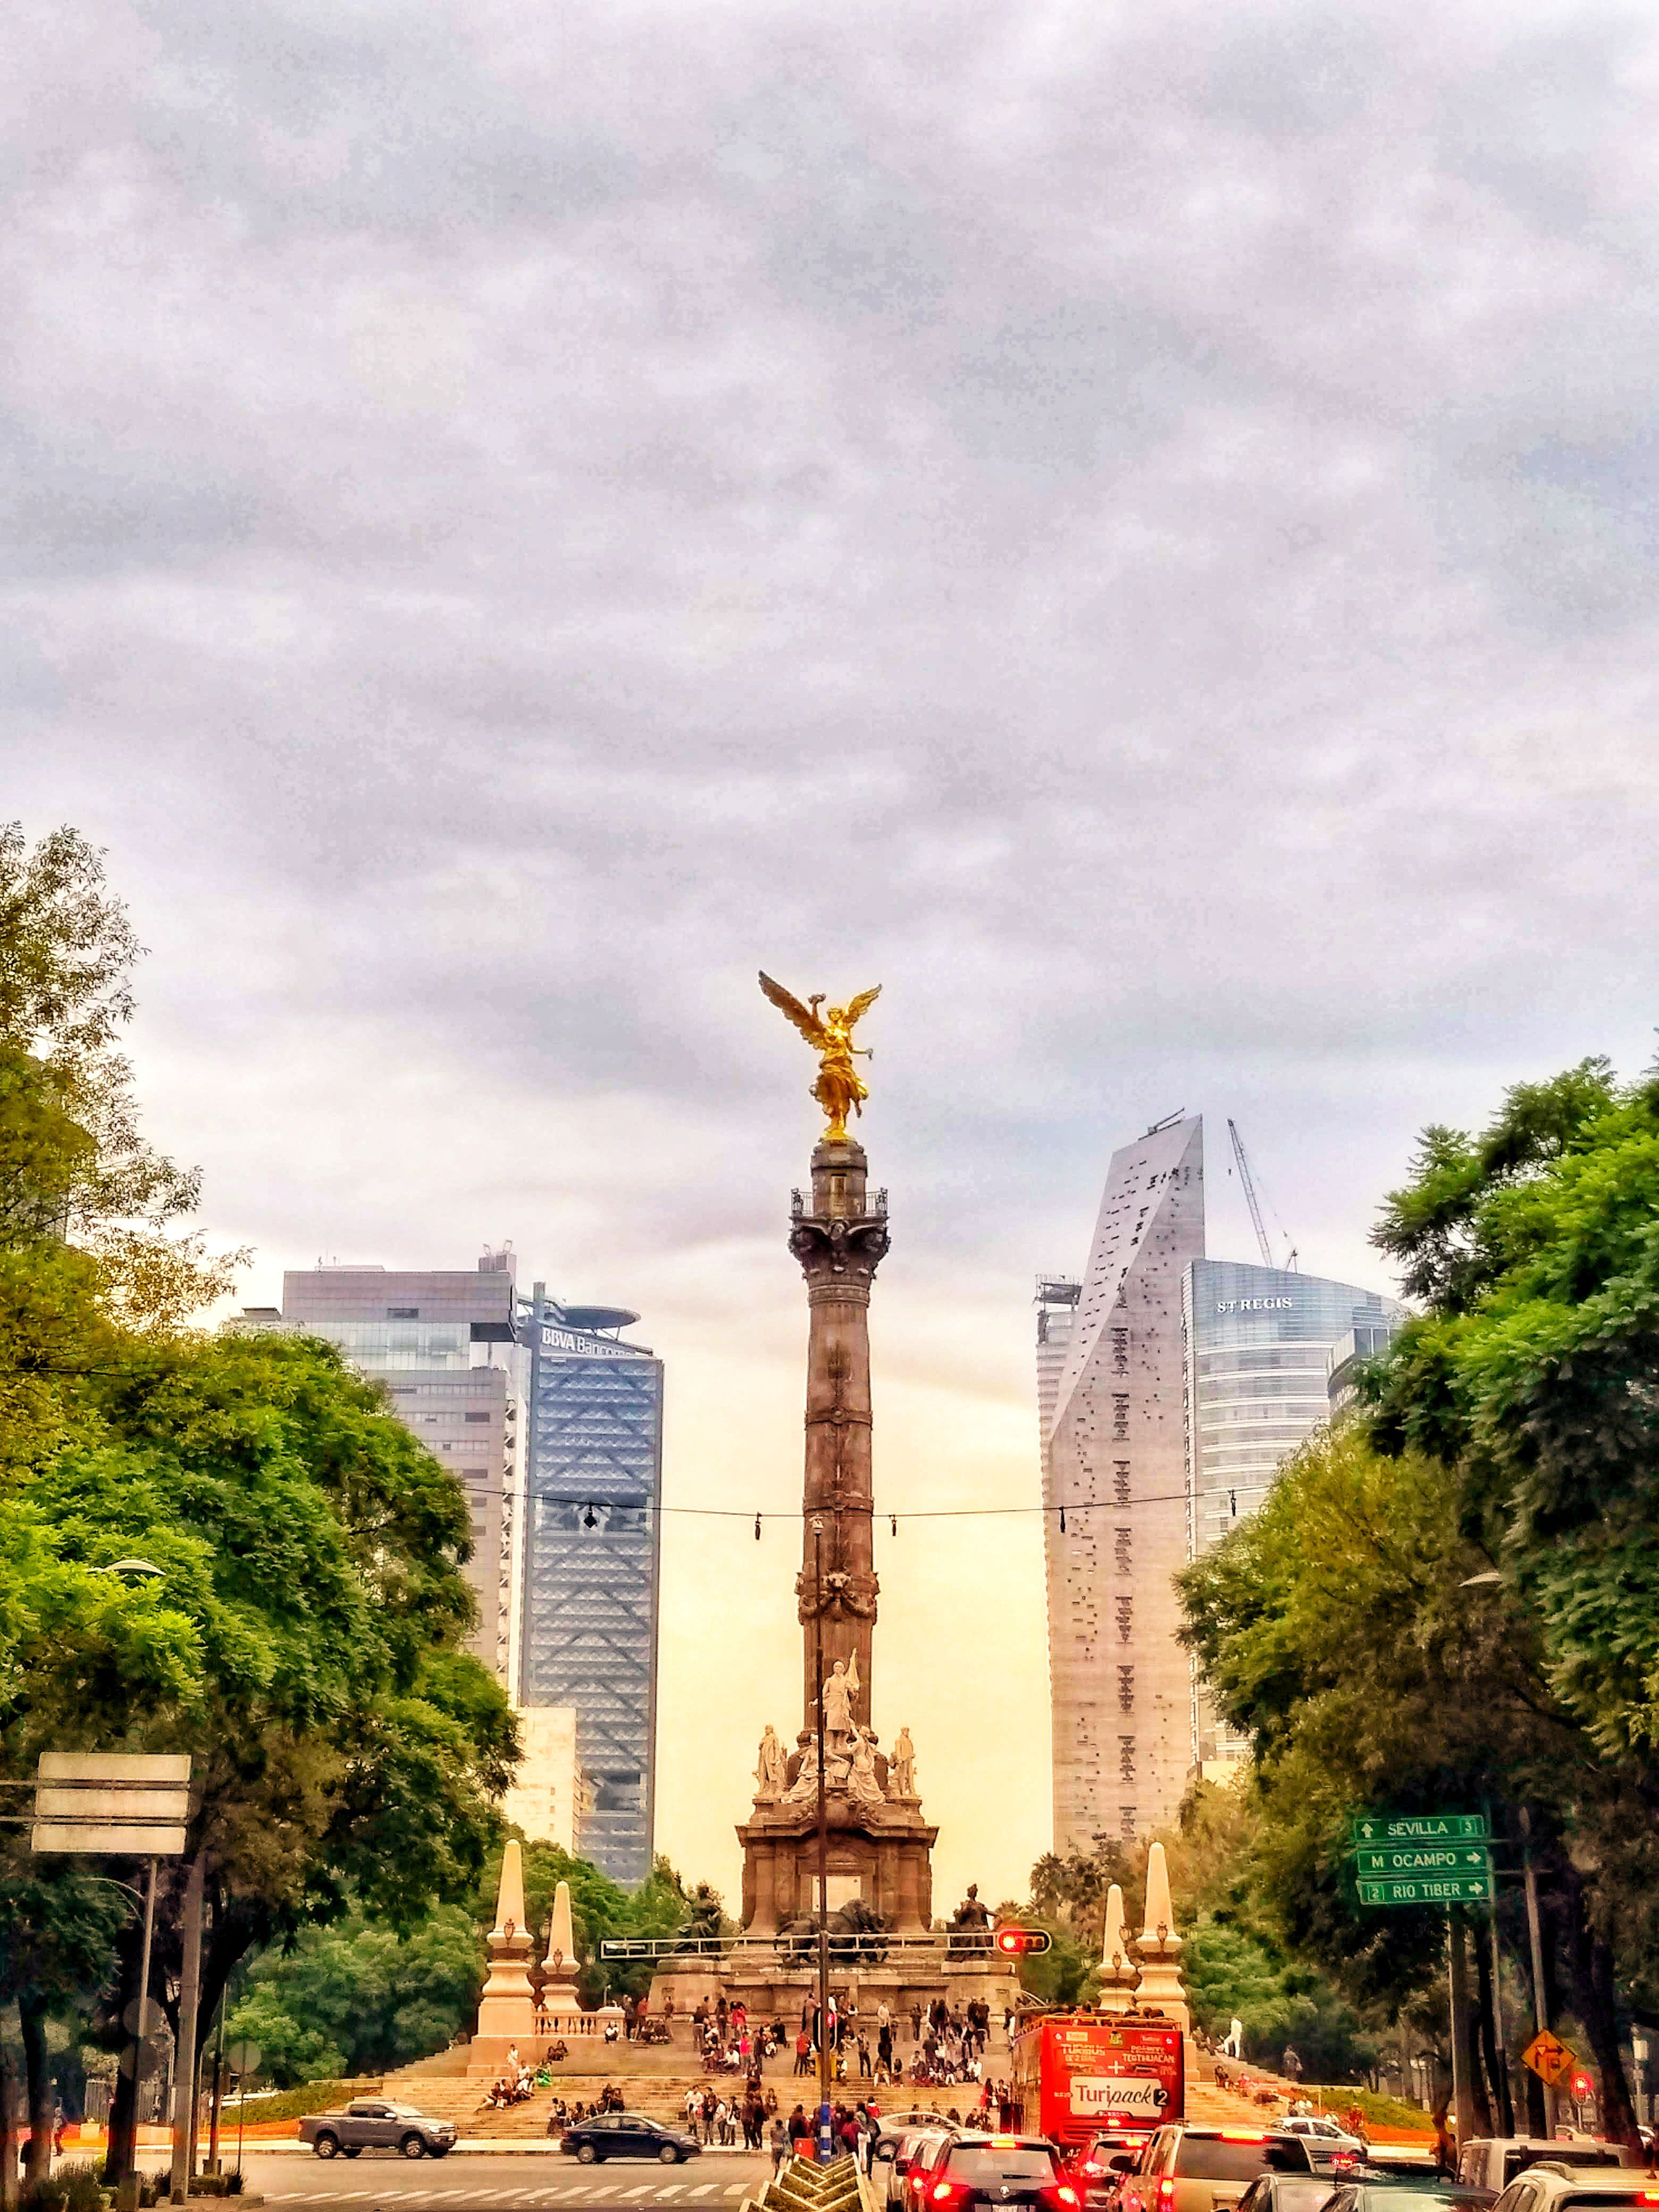 Independence Angel roundabout, Paseo de la Reforma in Mexico City. Aug 2018